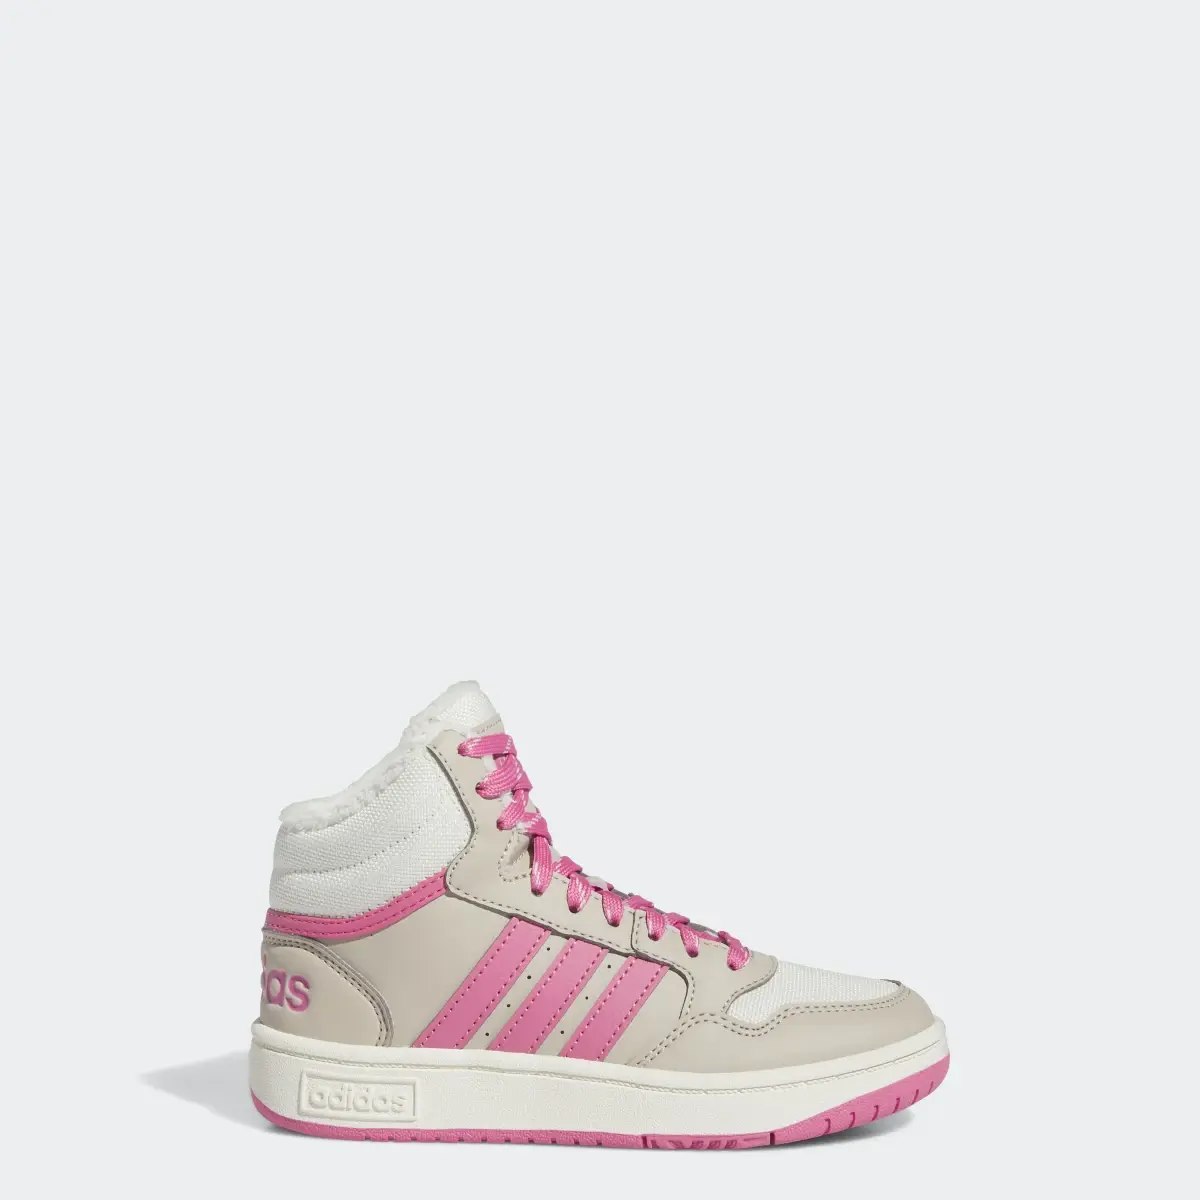 Adidas Hoops Mid 3.0 Shoes Kids. 1